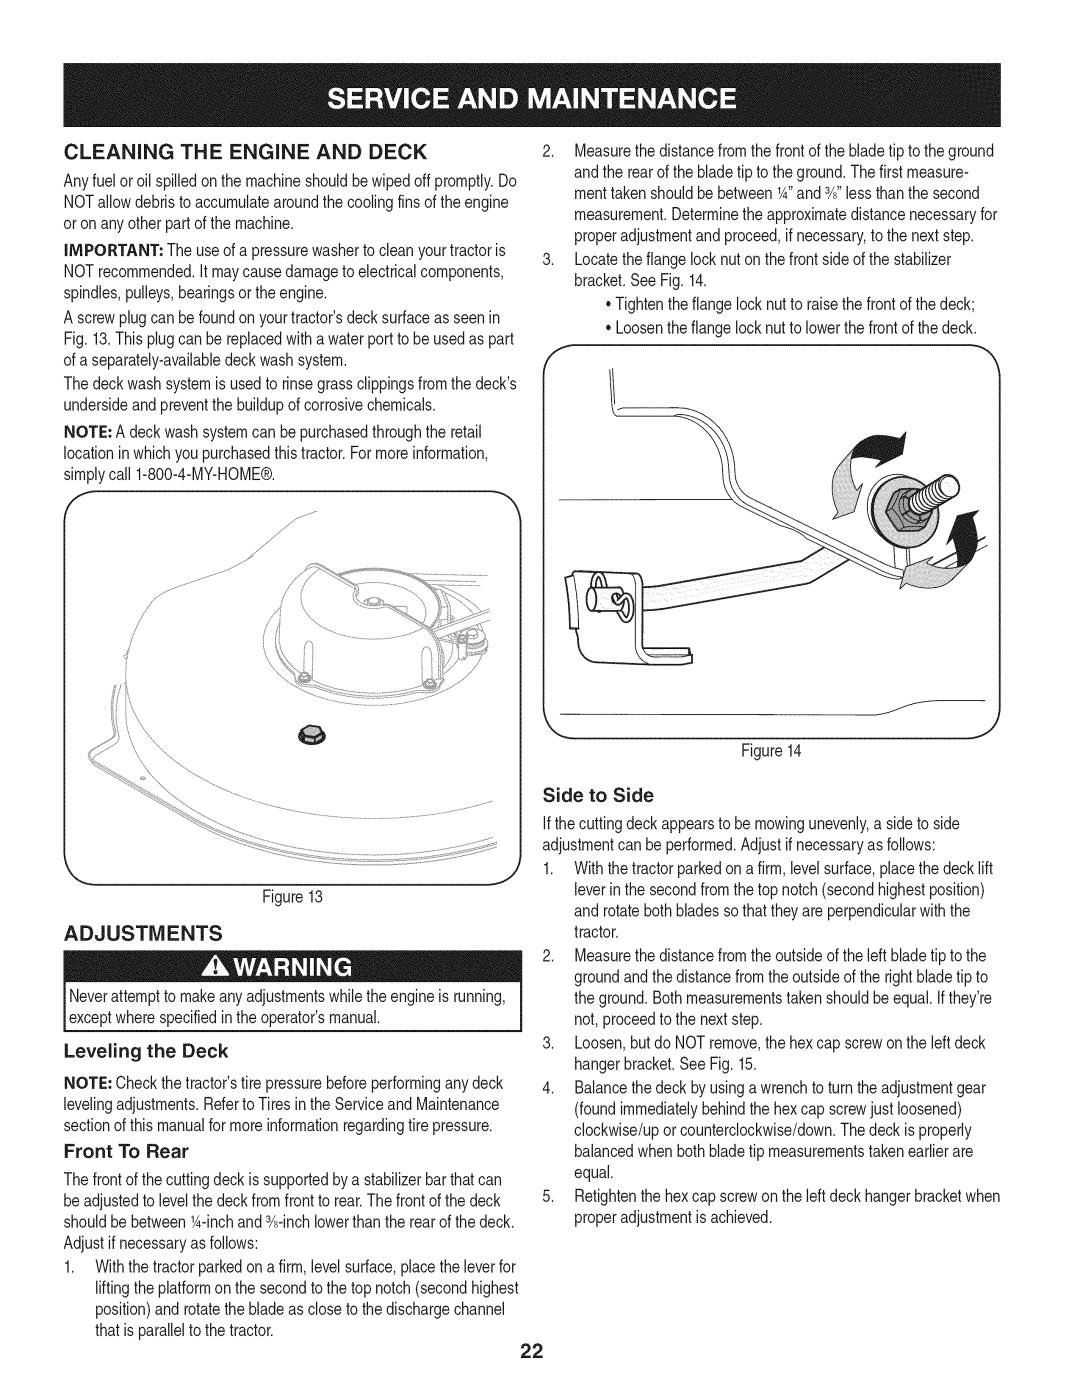 Craftsman 247.28901 manual Cleaning The Engine And Deck, Adjustments, Leveling the Deck 